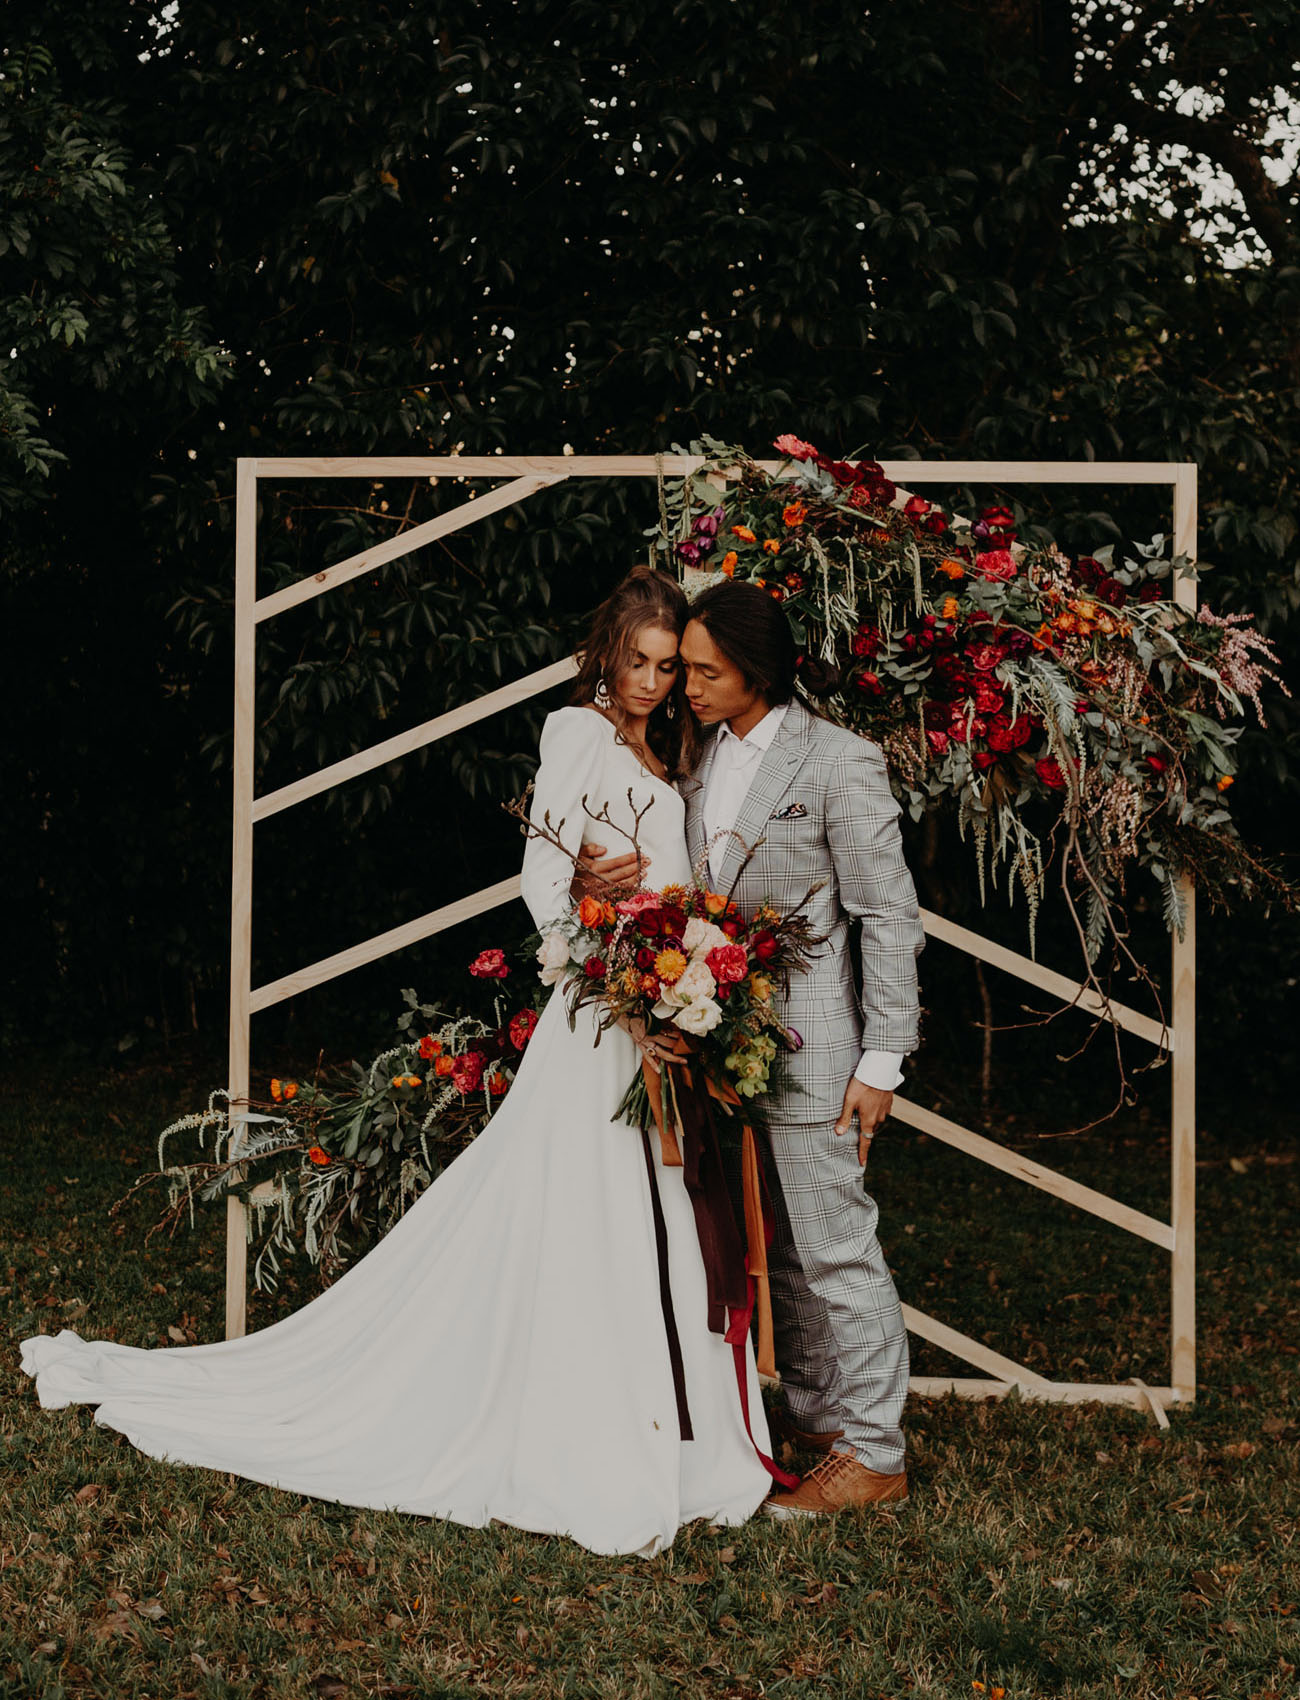 The wedding backdrop was a geometric one, with bold fall florals attached